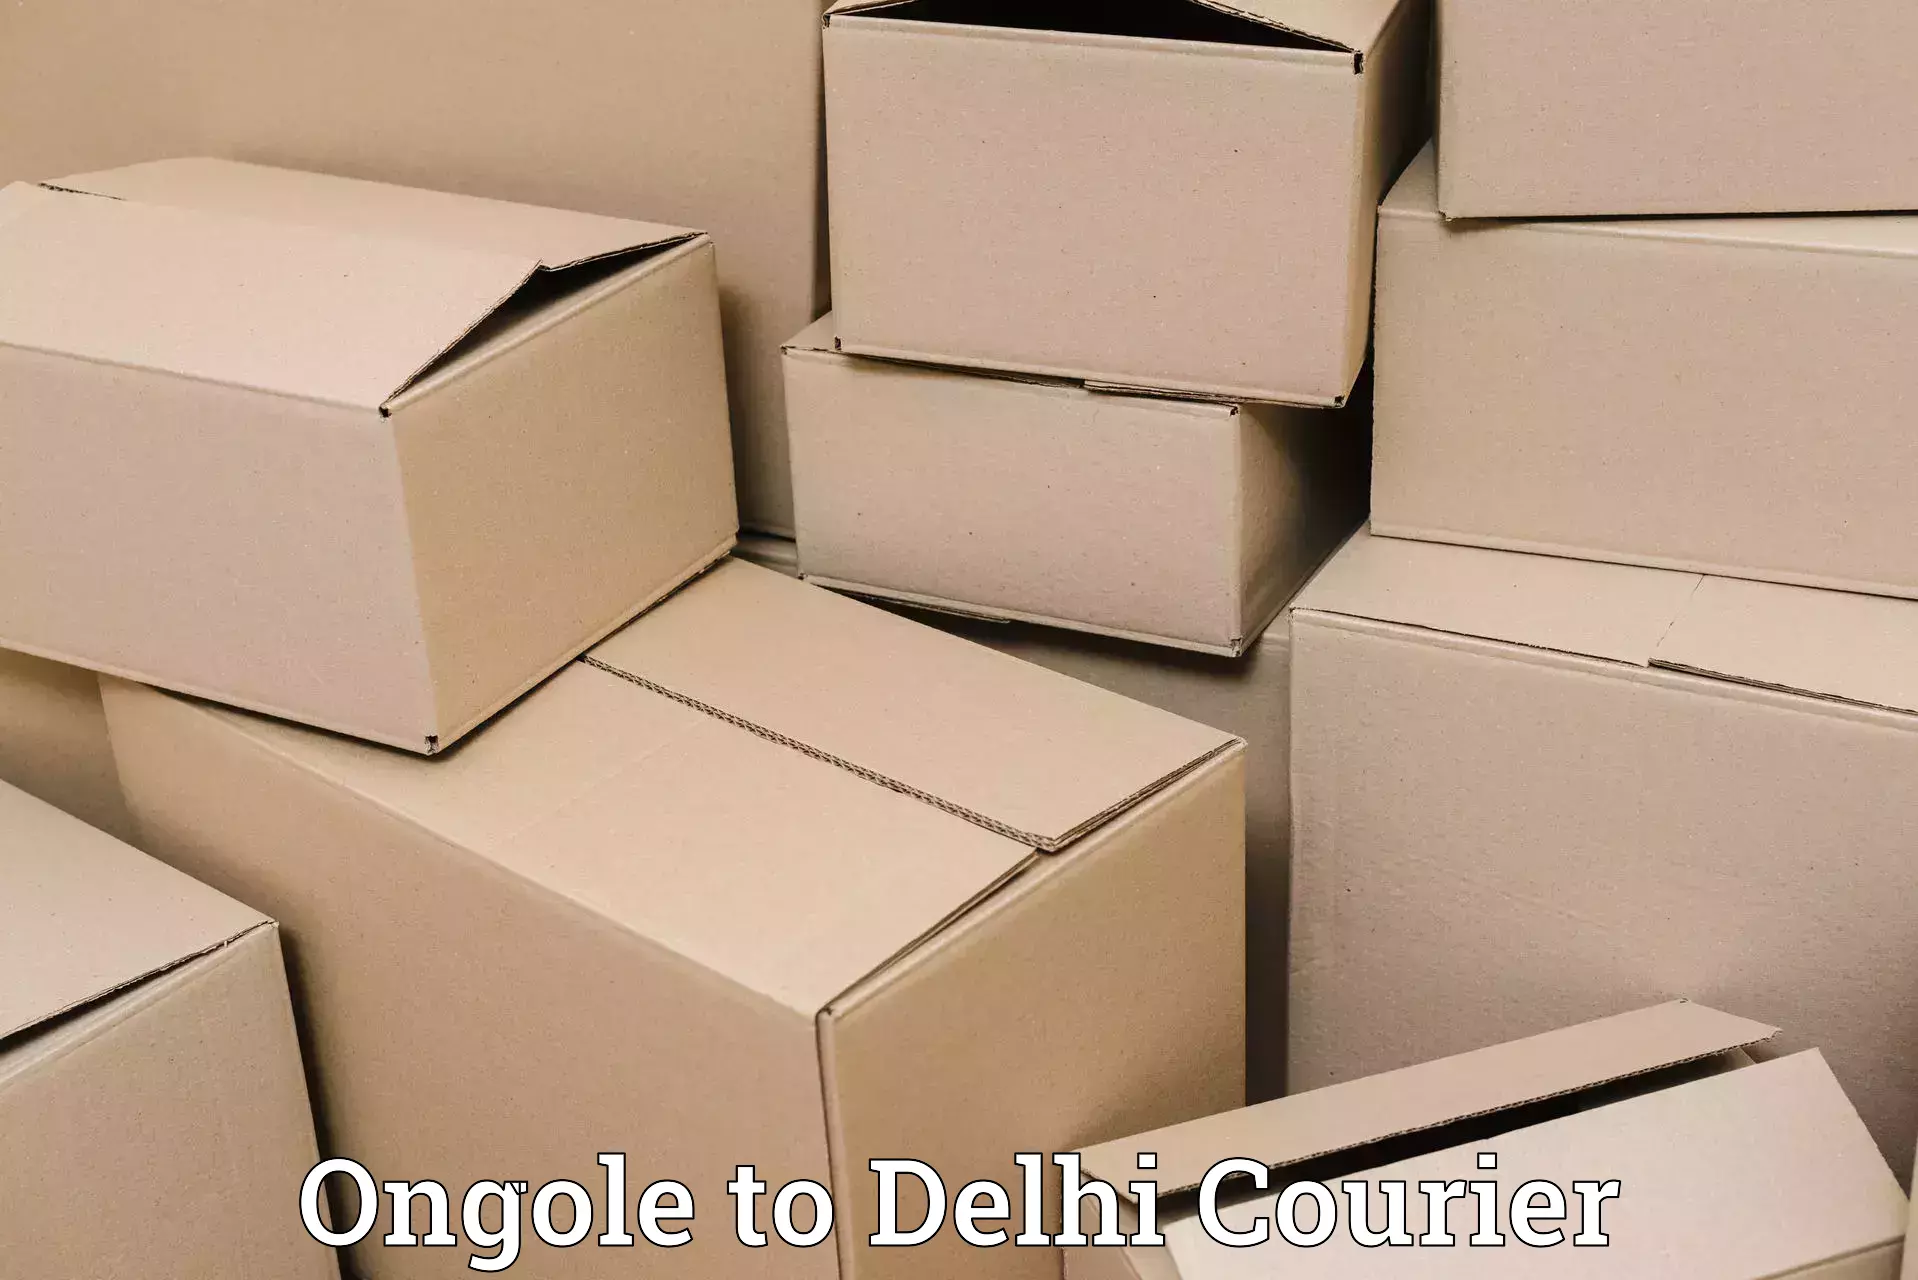 Individual parcel service Ongole to University of Delhi